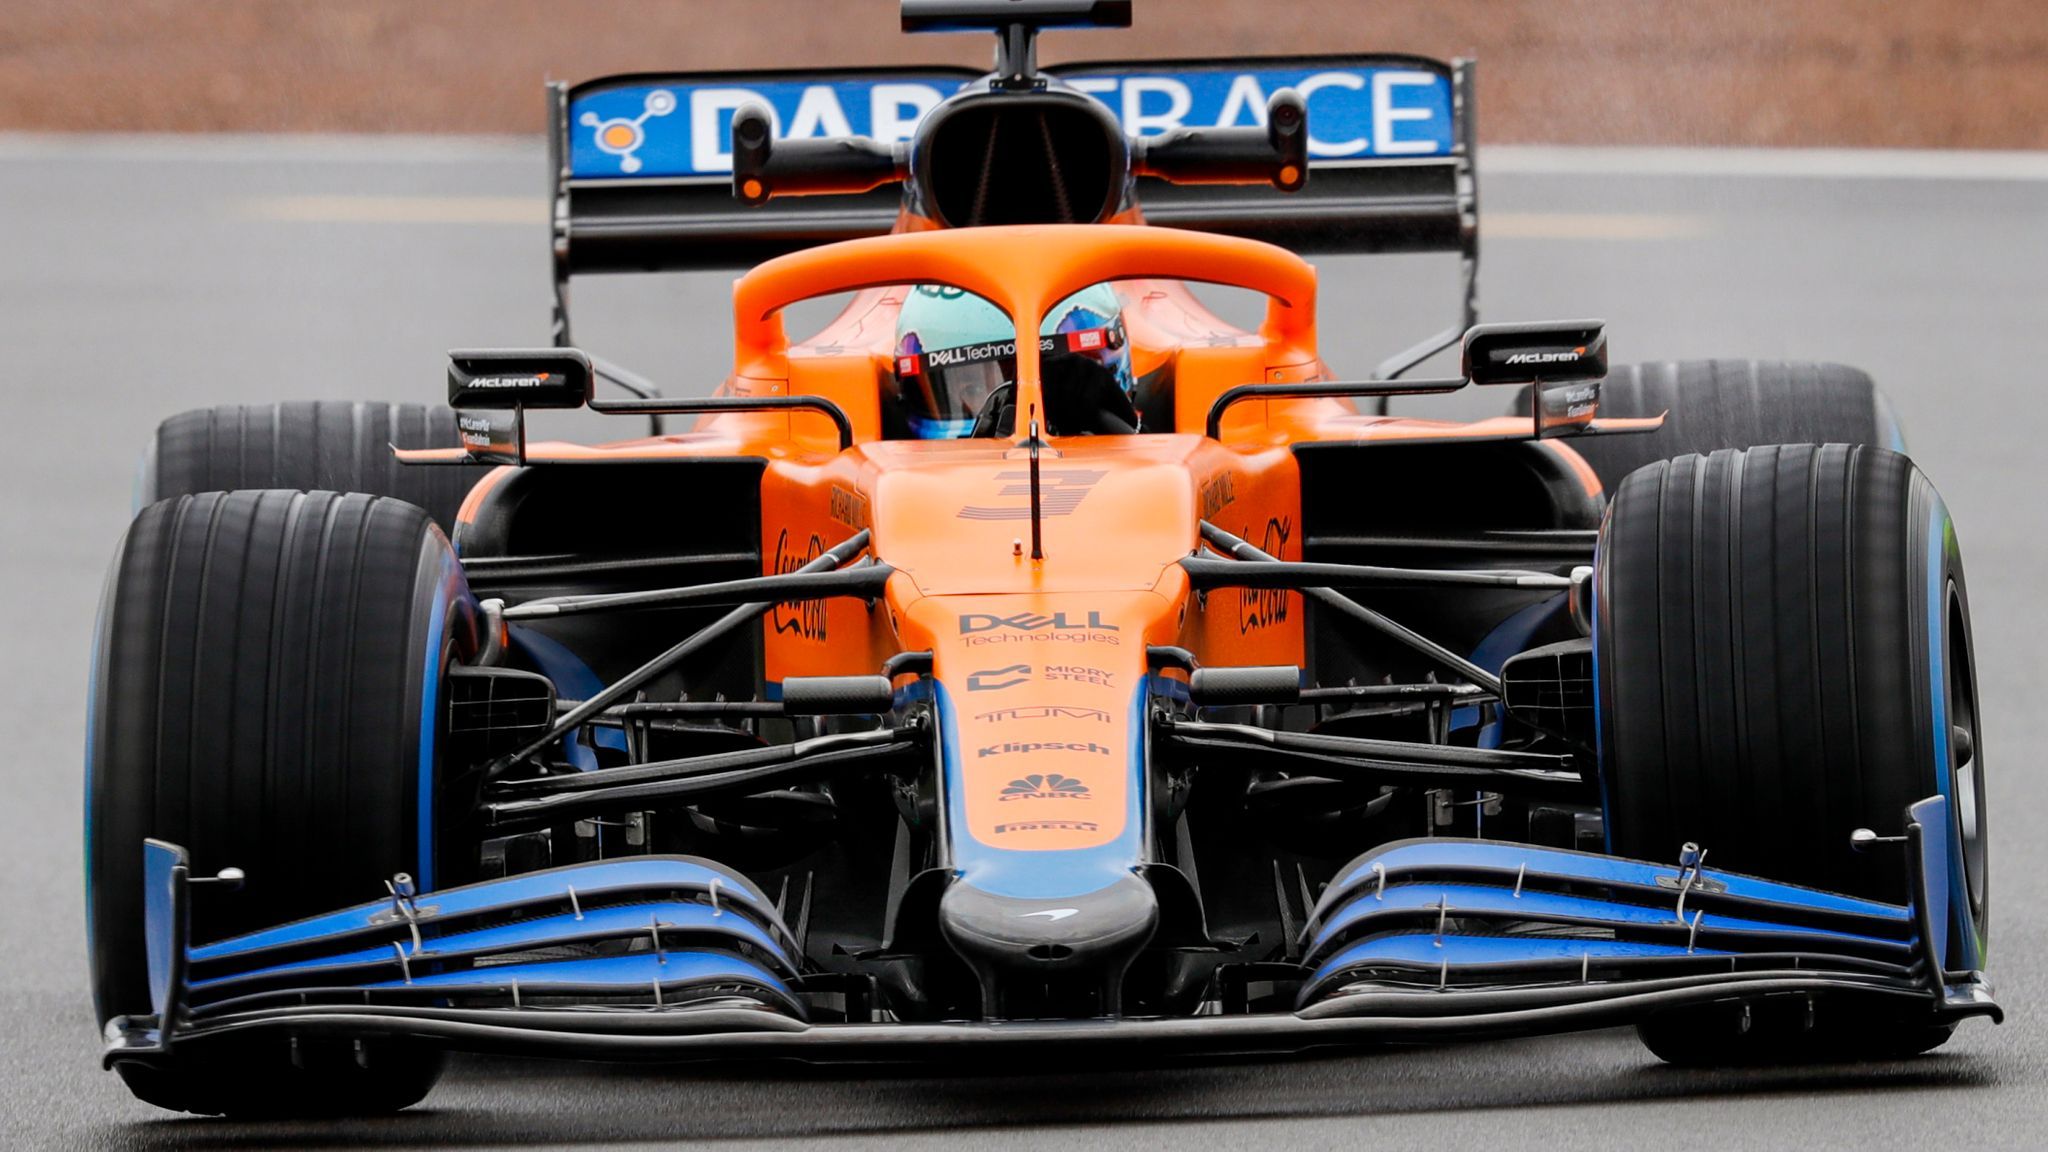 McLaren Hit The Track For First Time With New Mercedes Powered MCL35M F1 Car At Silverstone